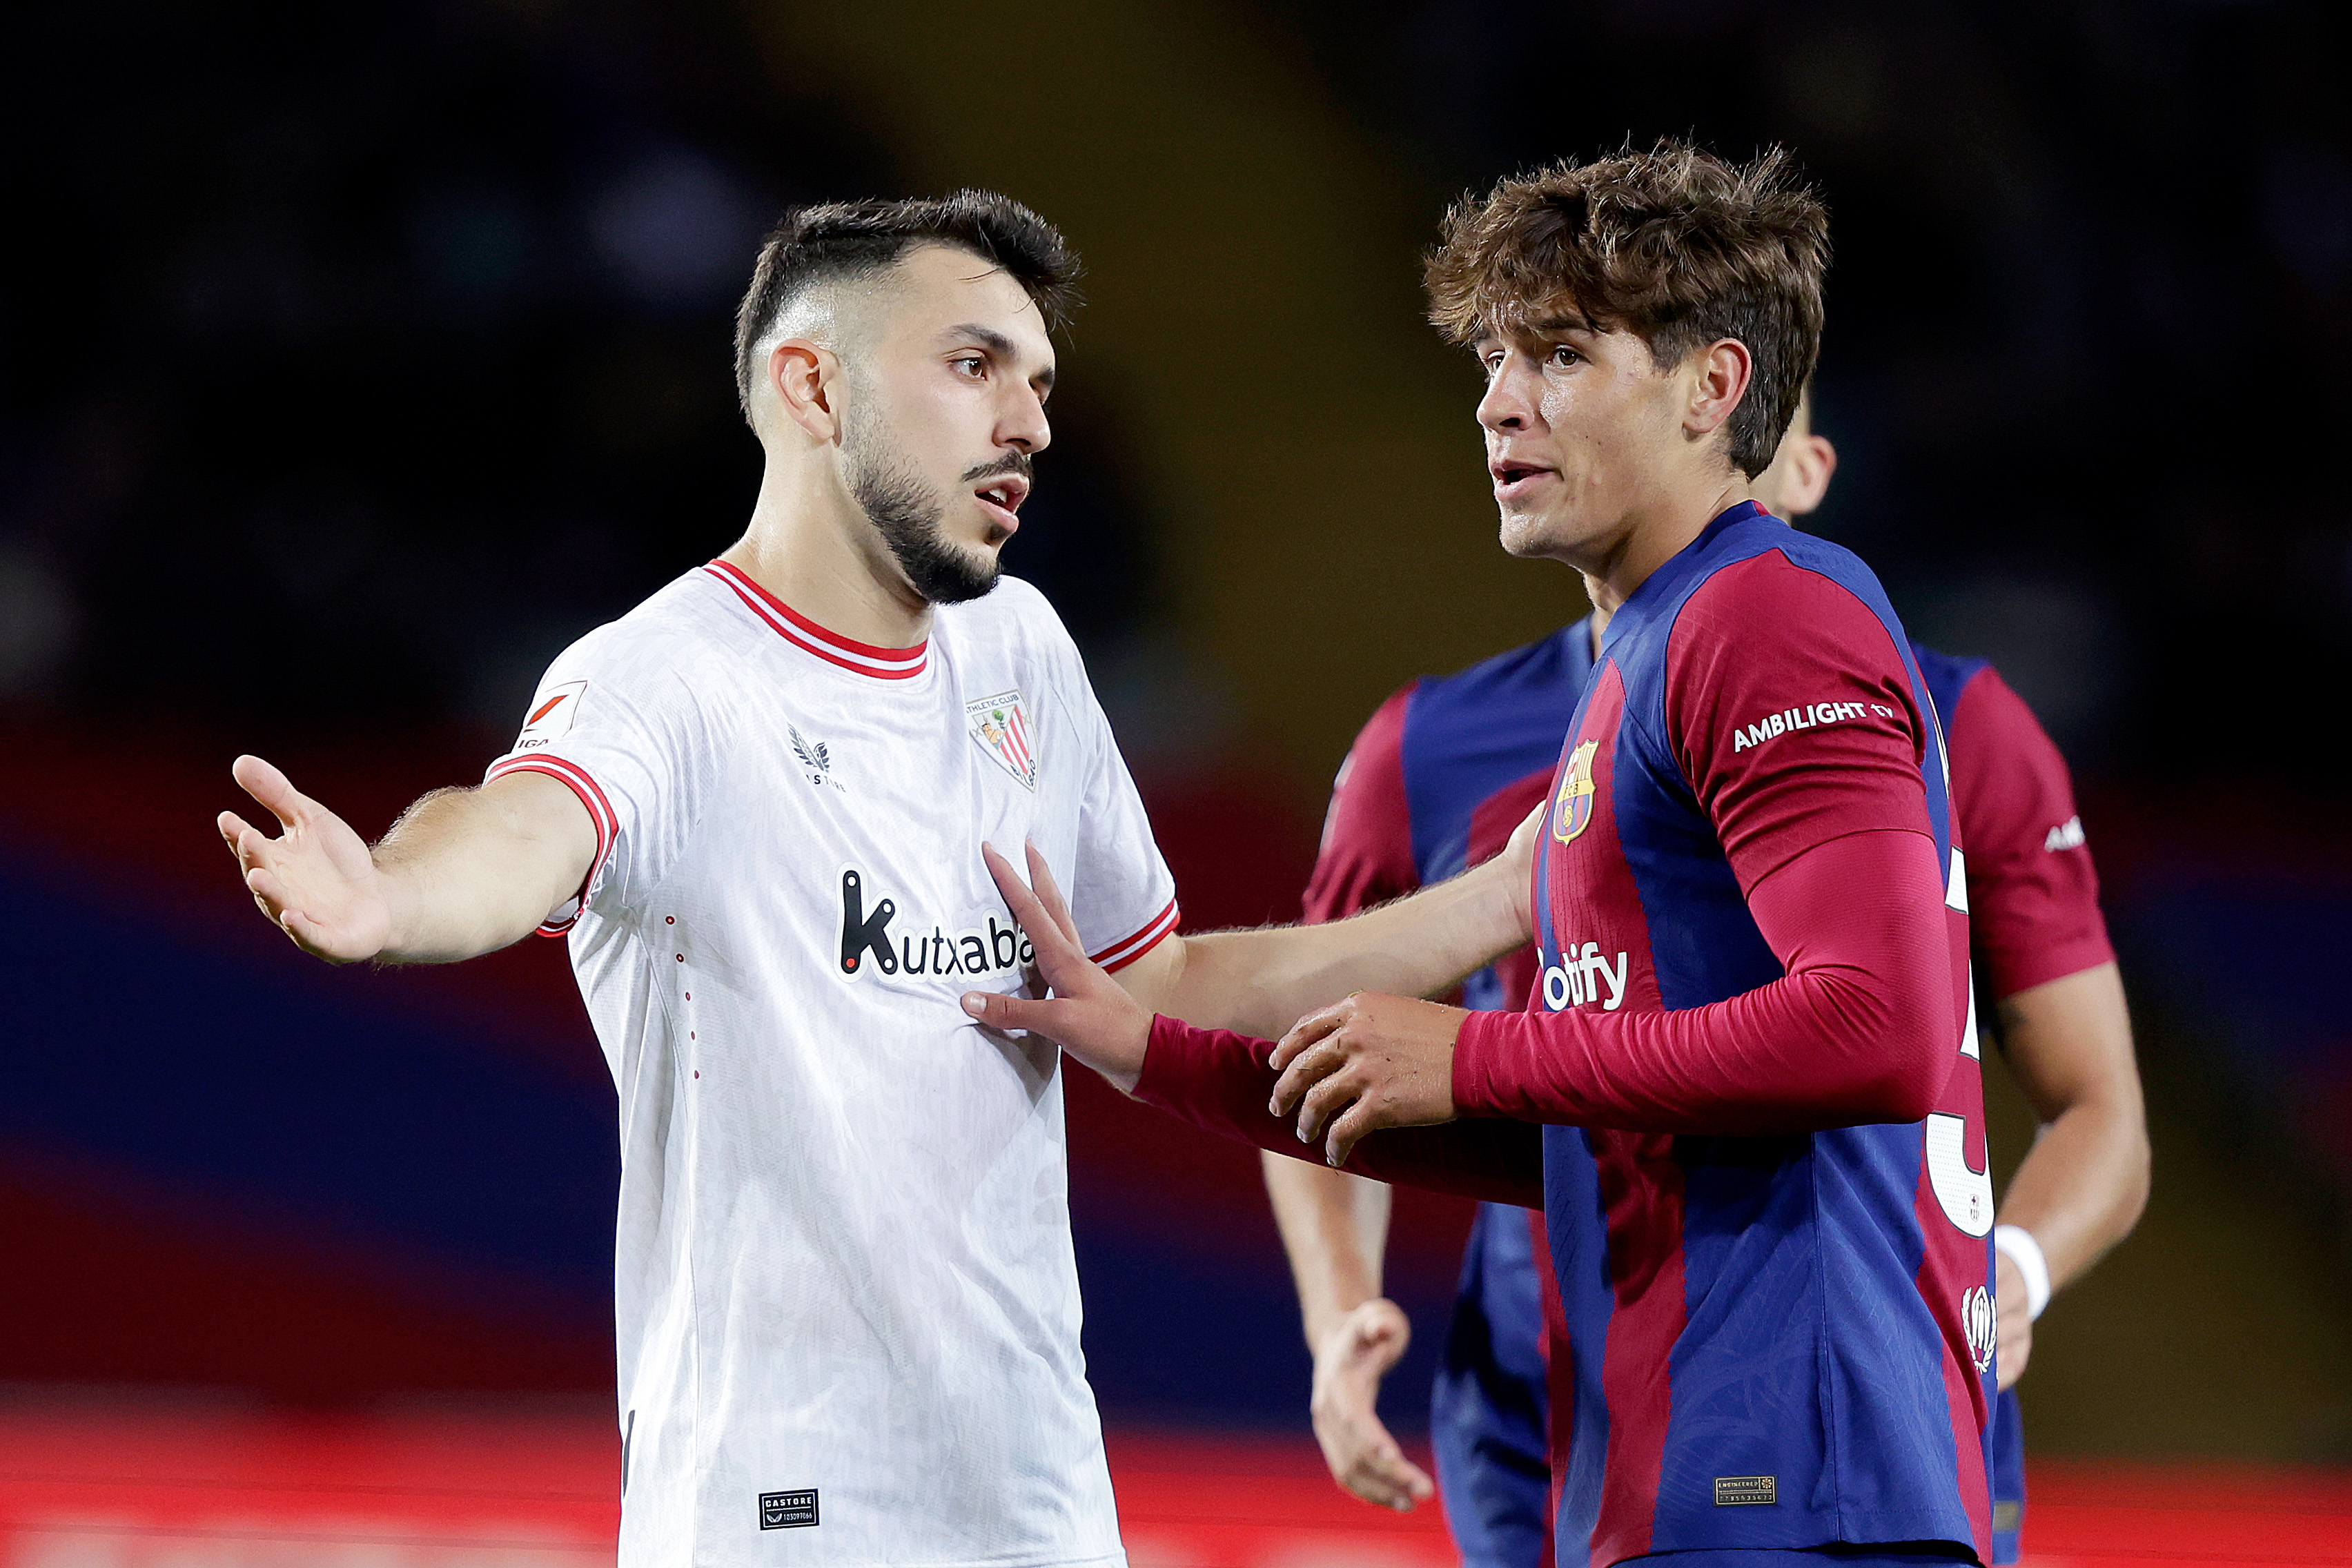  The image shows a player gesturing while another player argues with him during a match between Athletic Club and FC Barcelona on 23 May 2021, in Barcelona, Spain.